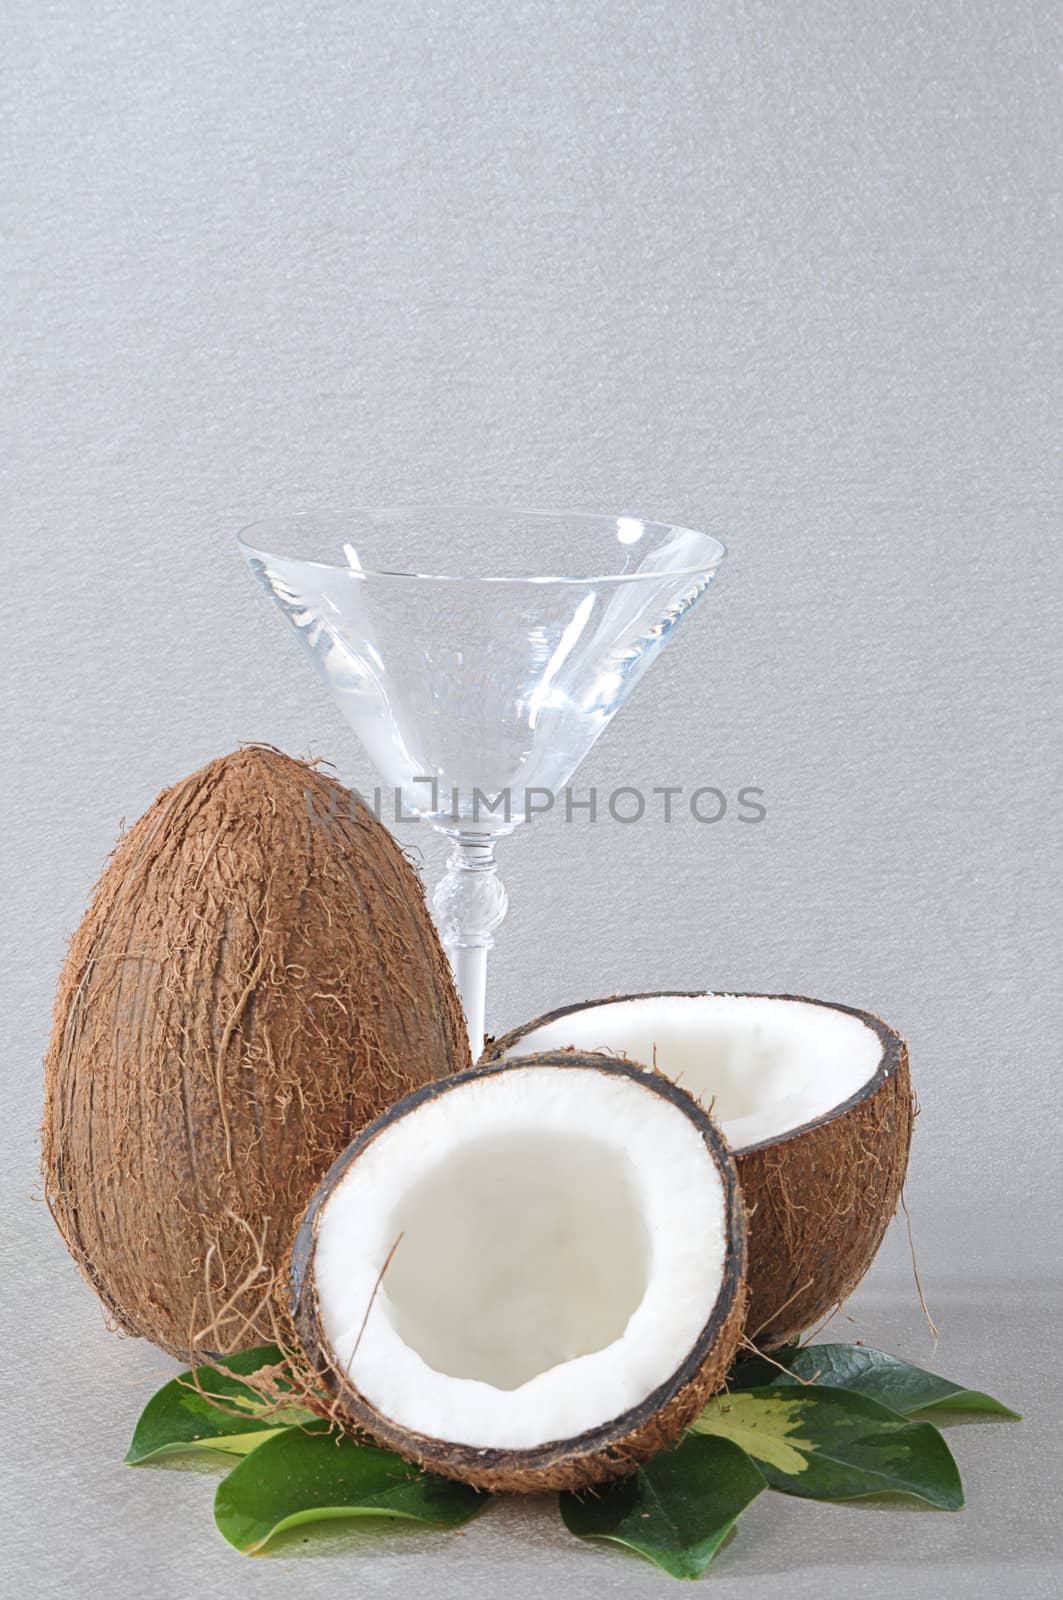 Coconut and Glass by dyoma